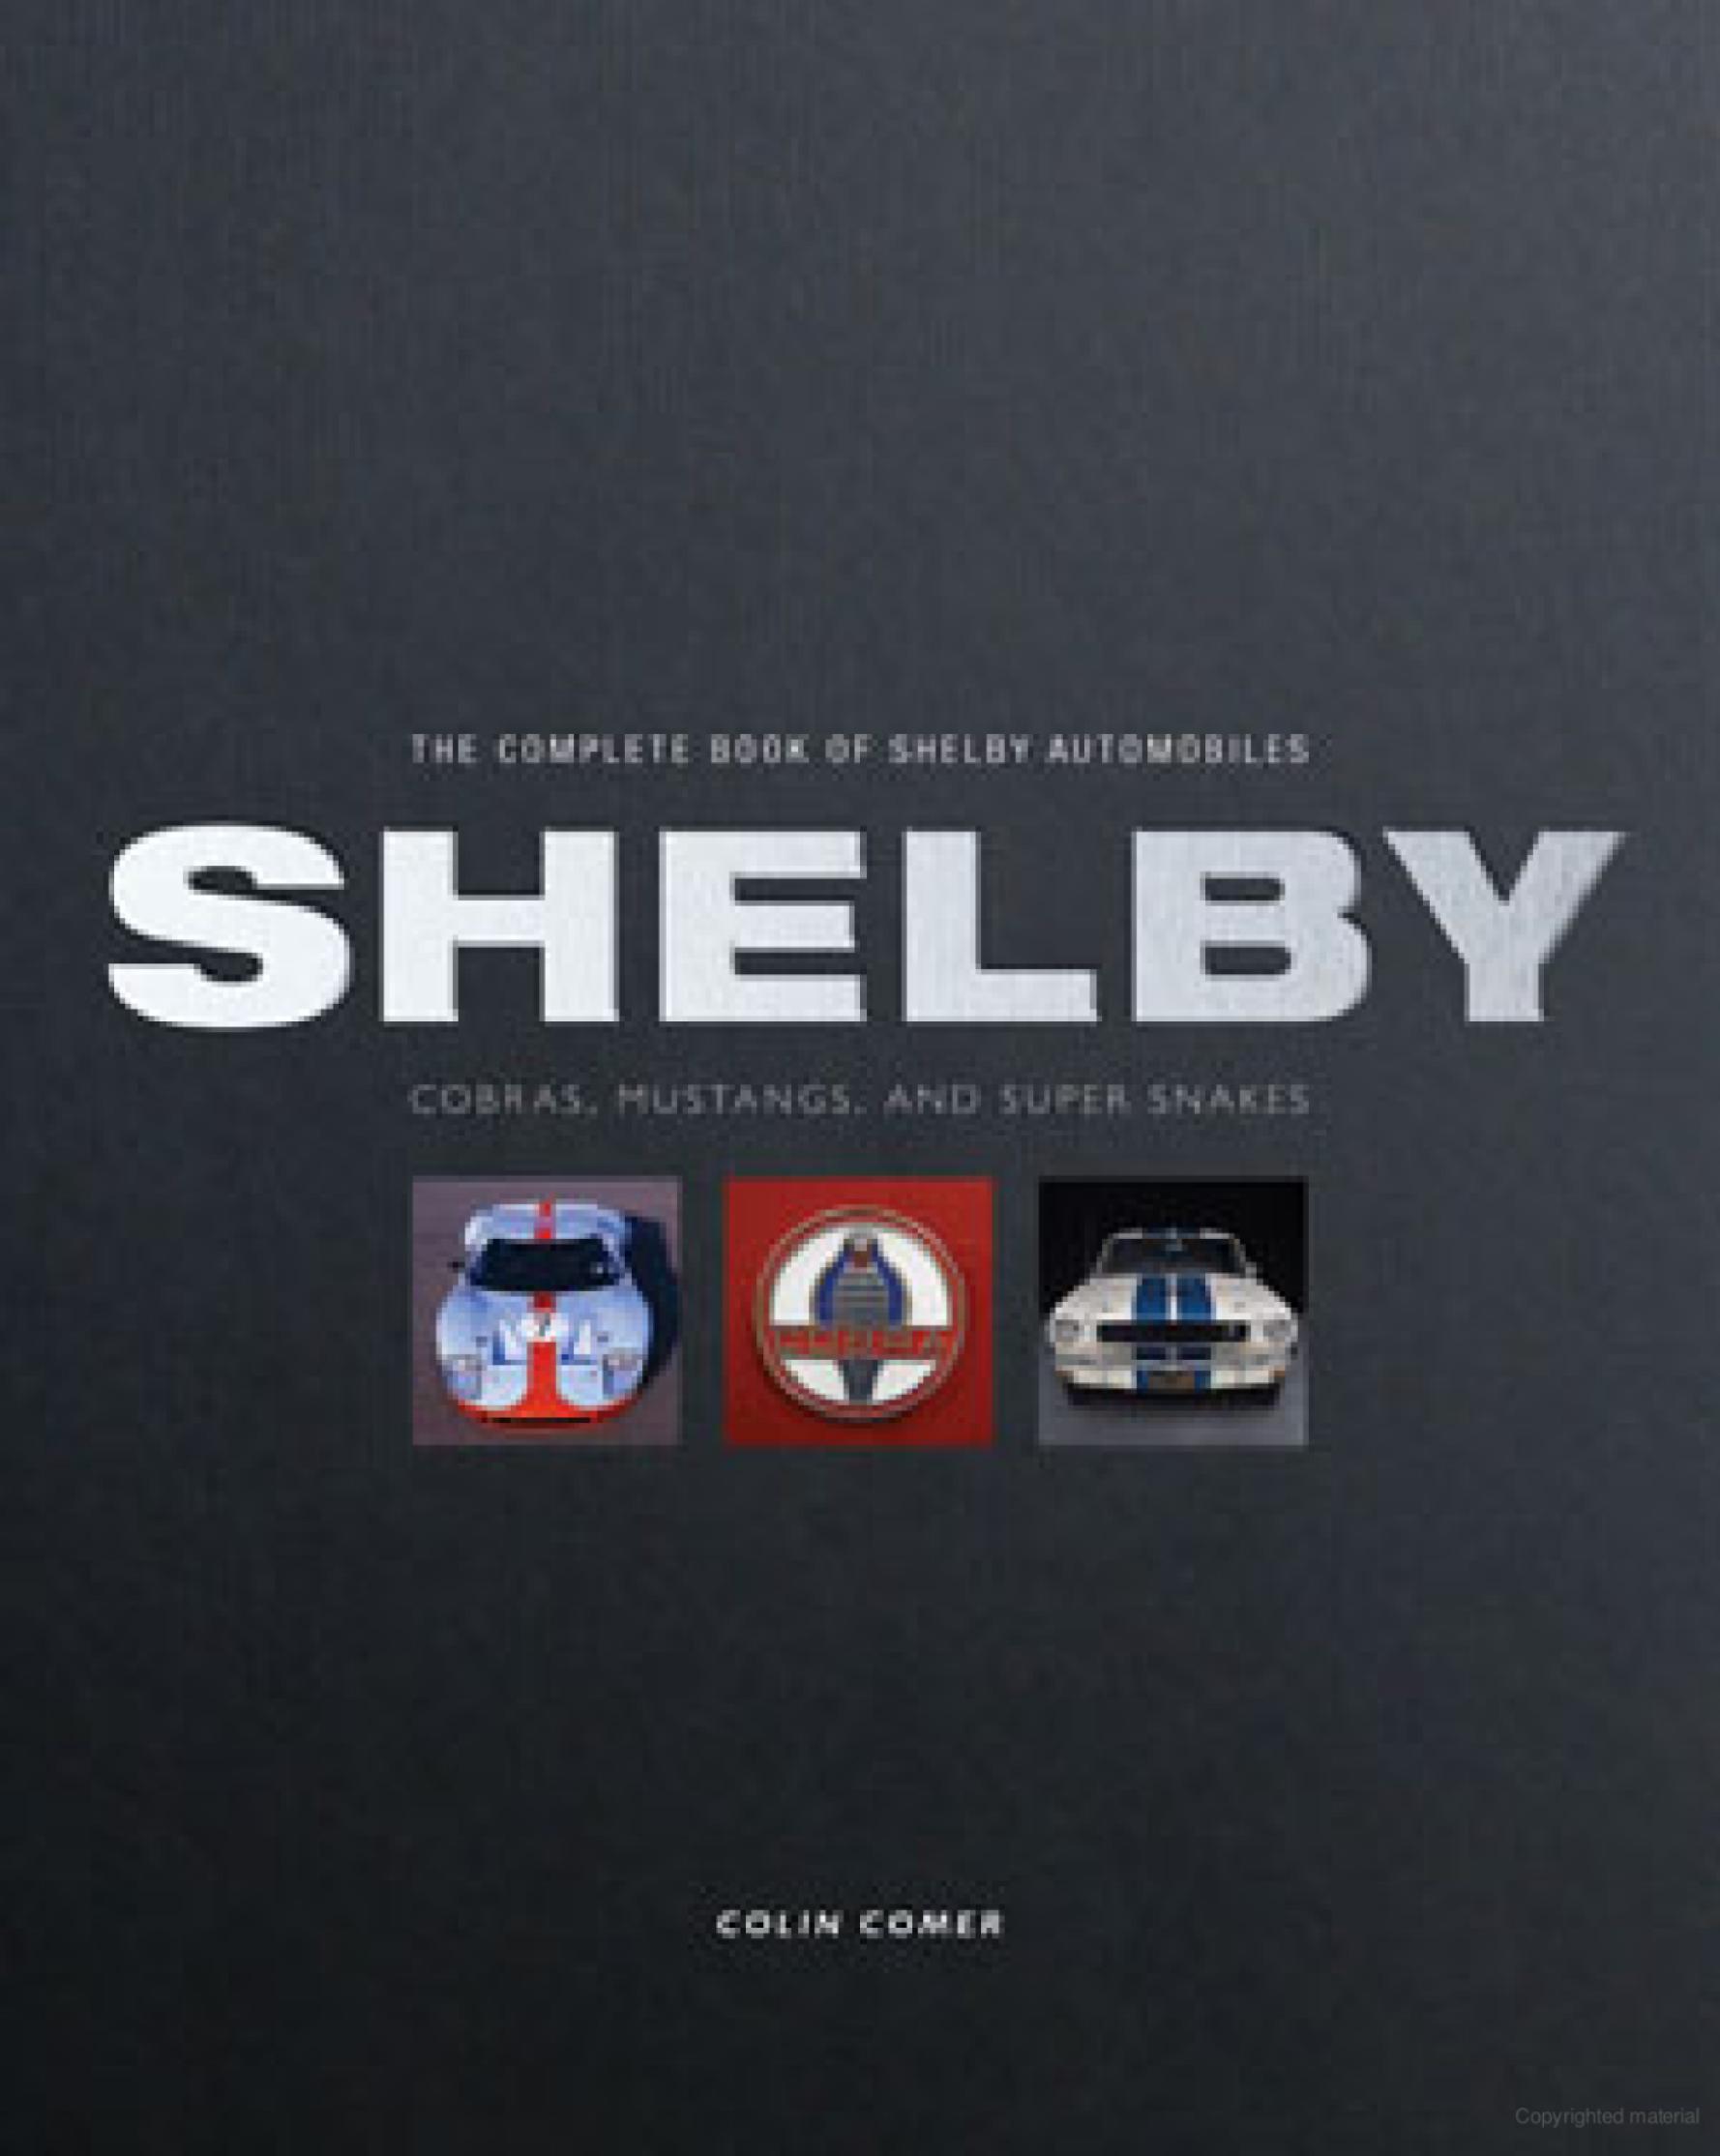 Книга Shelby: the complete book of shelby automobiles. Автор: Colin Comer